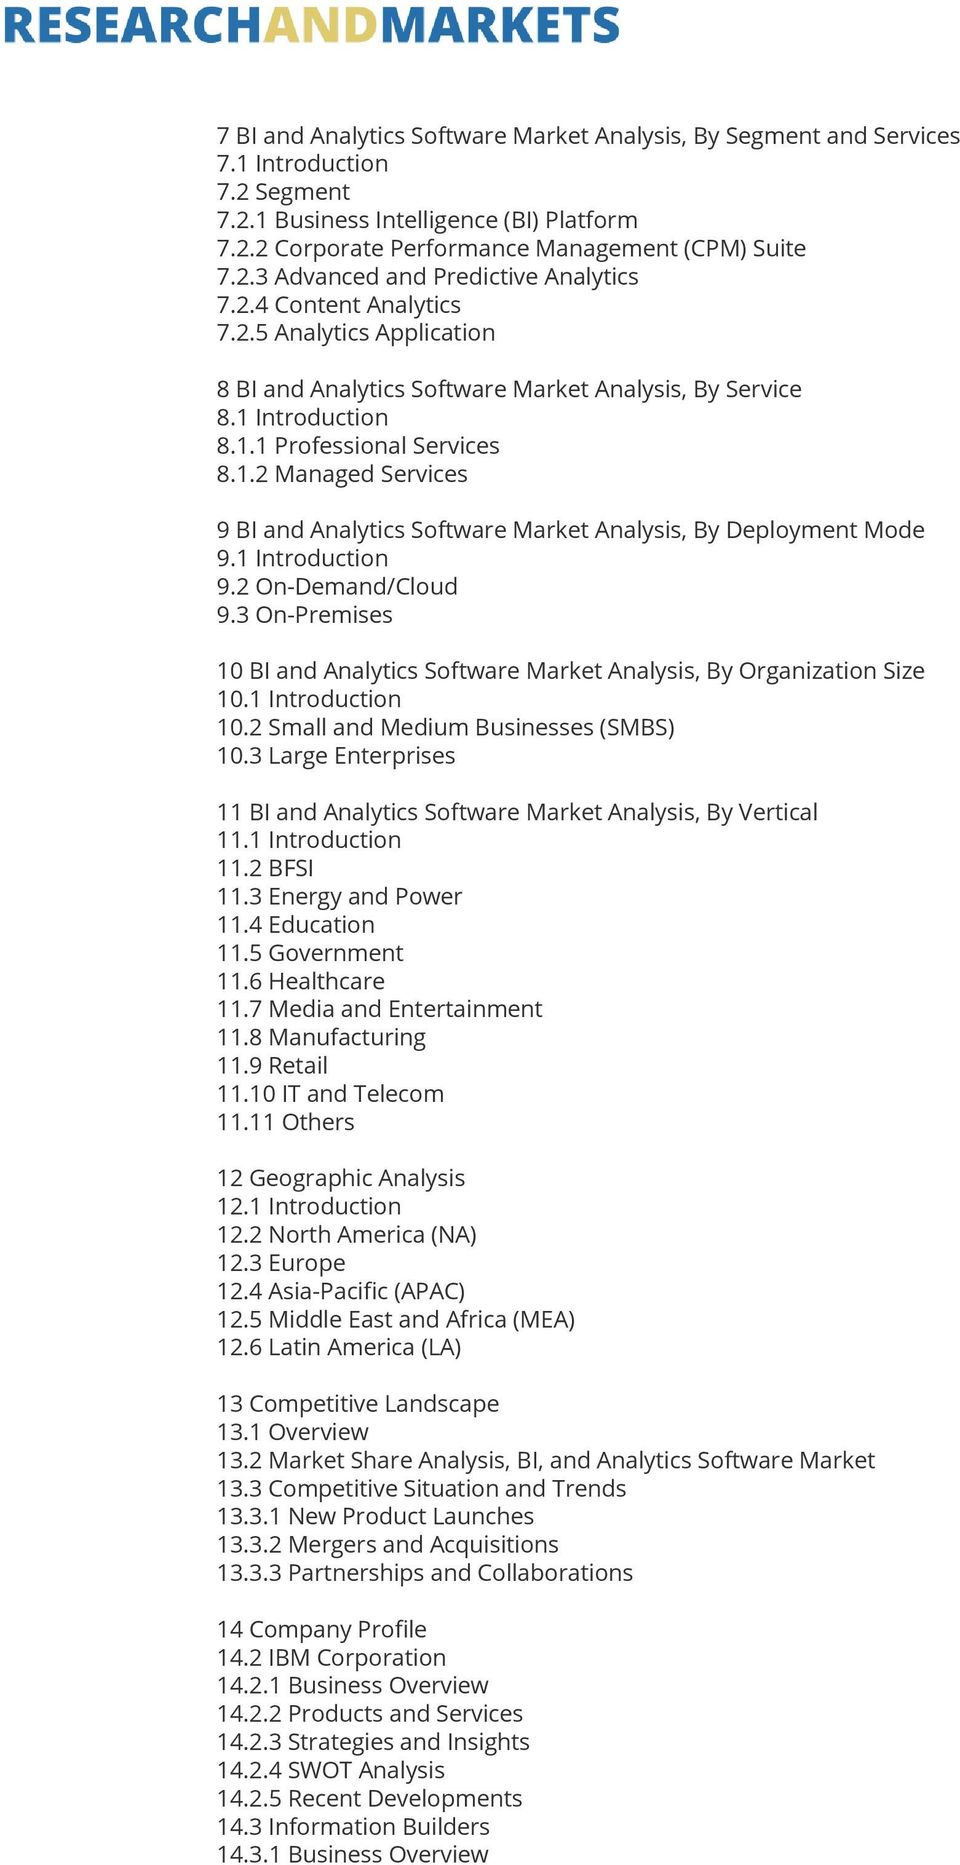 1 Introduction 9.2 On-Demand/Cloud 9.3 On-Premises 10 BI and Analytics Software Market Analysis, By Organization Size 10.1 Introduction 10.2 Small and Medium Businesses (SMBS) 10.